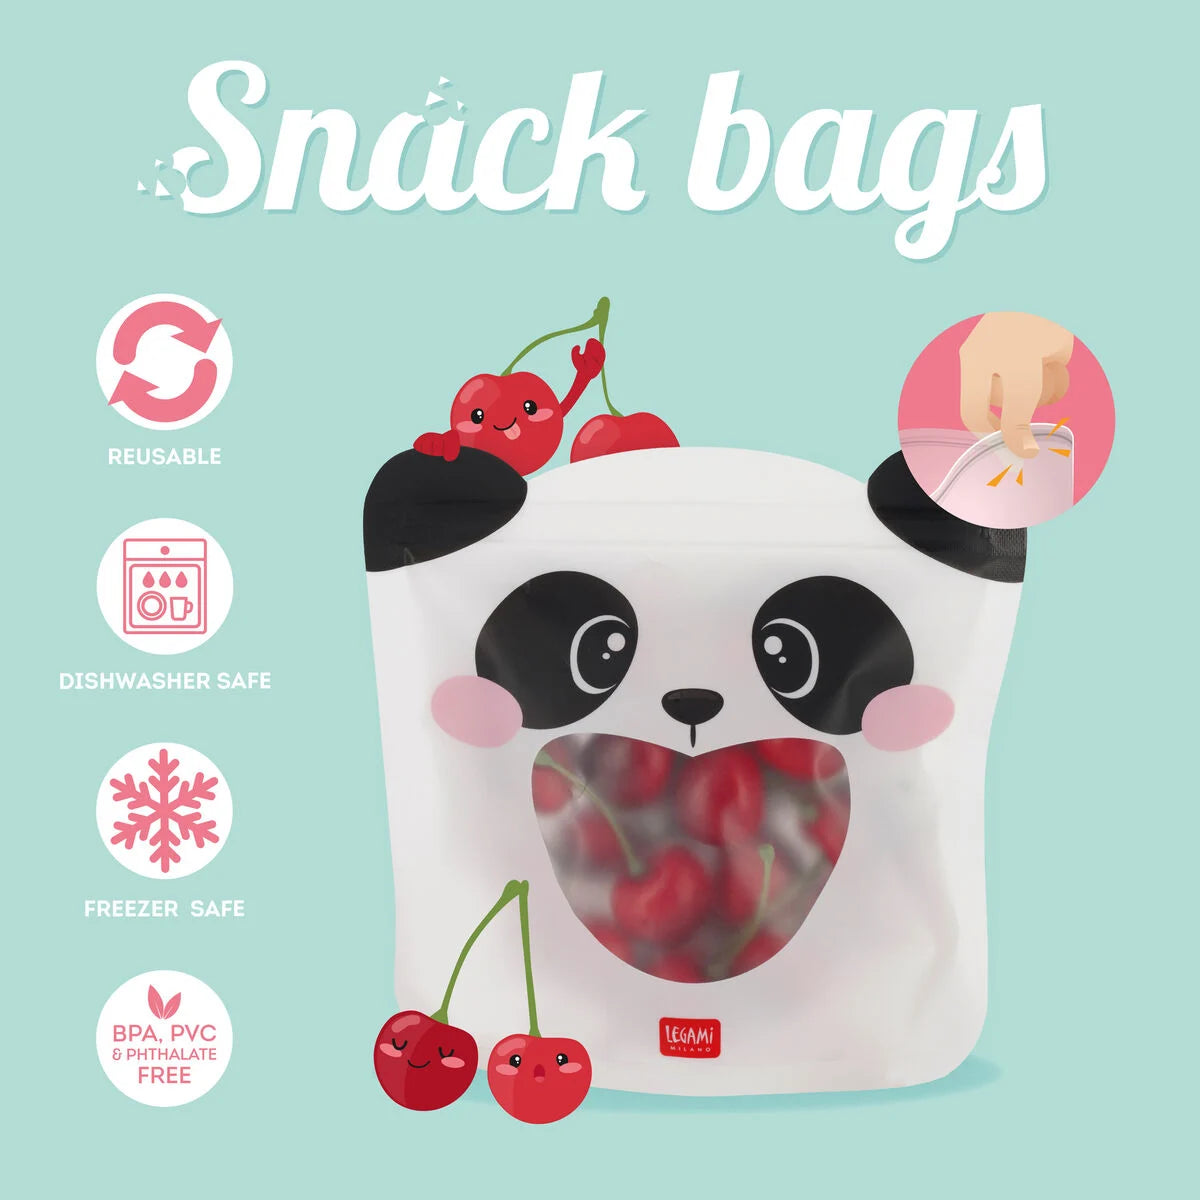 Fabulous Gifts Food Storage Legami Set Of 3 Reusable Food Pouches Panda by Weirs of Baggot Street